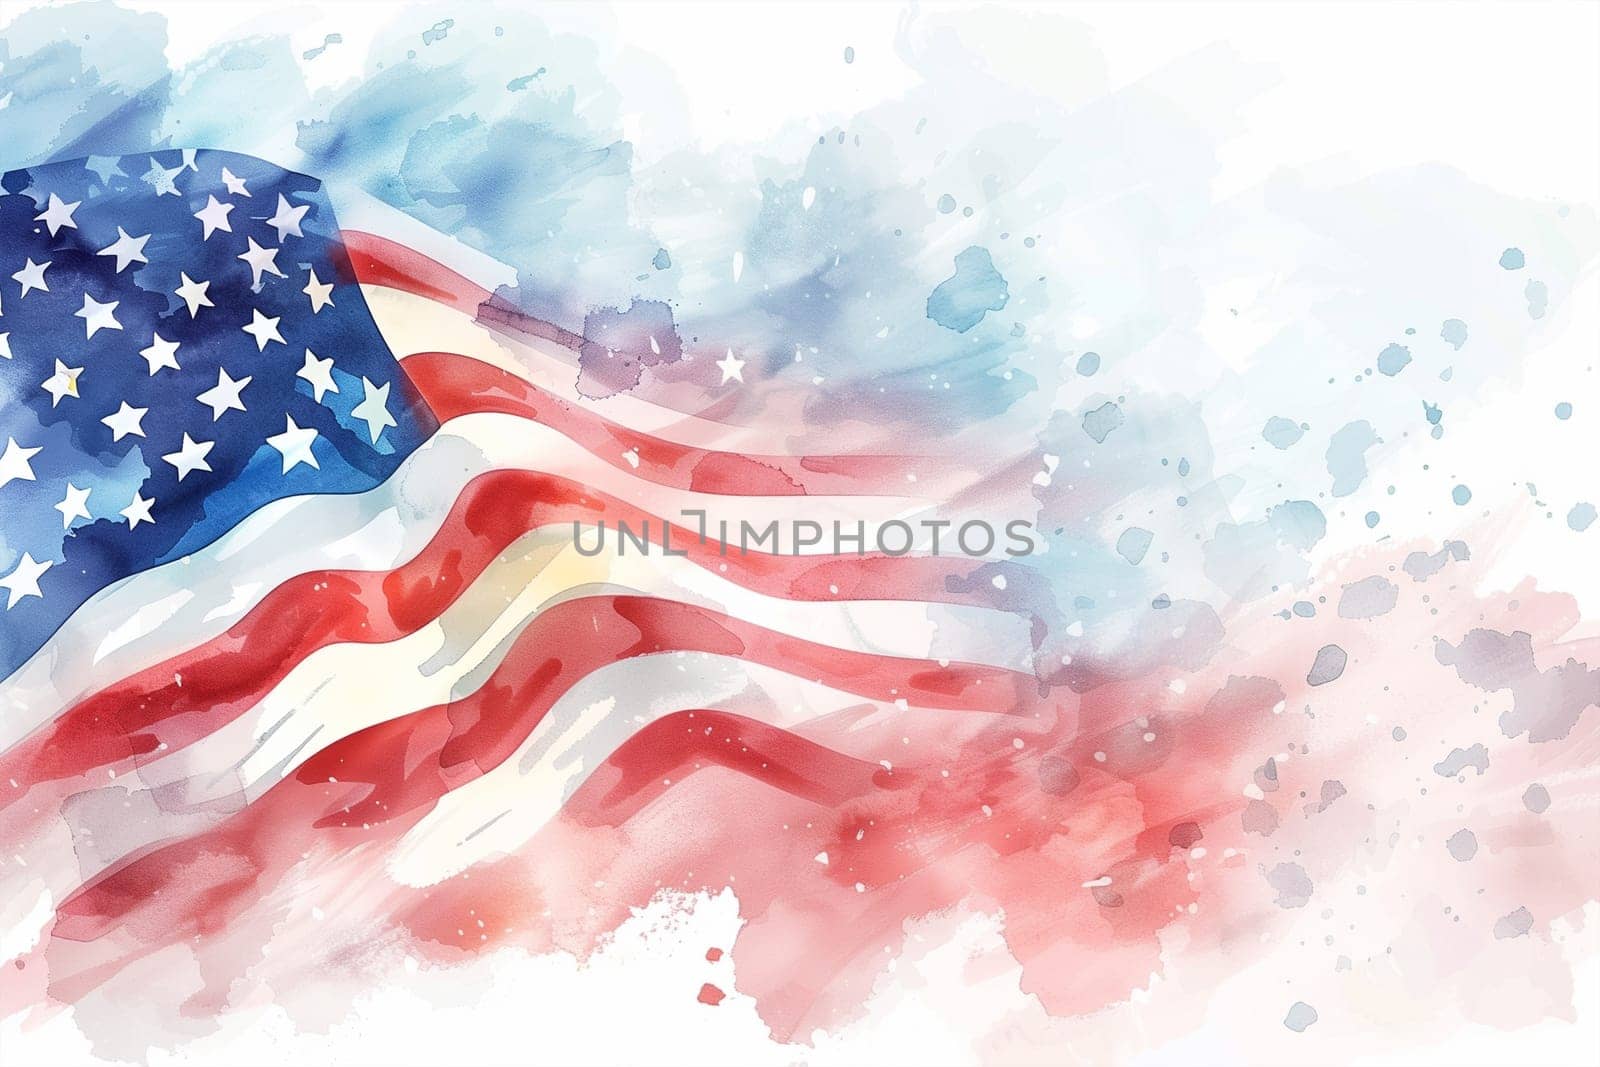 An American flag, symbolizing the United States, painted on a stark white background.